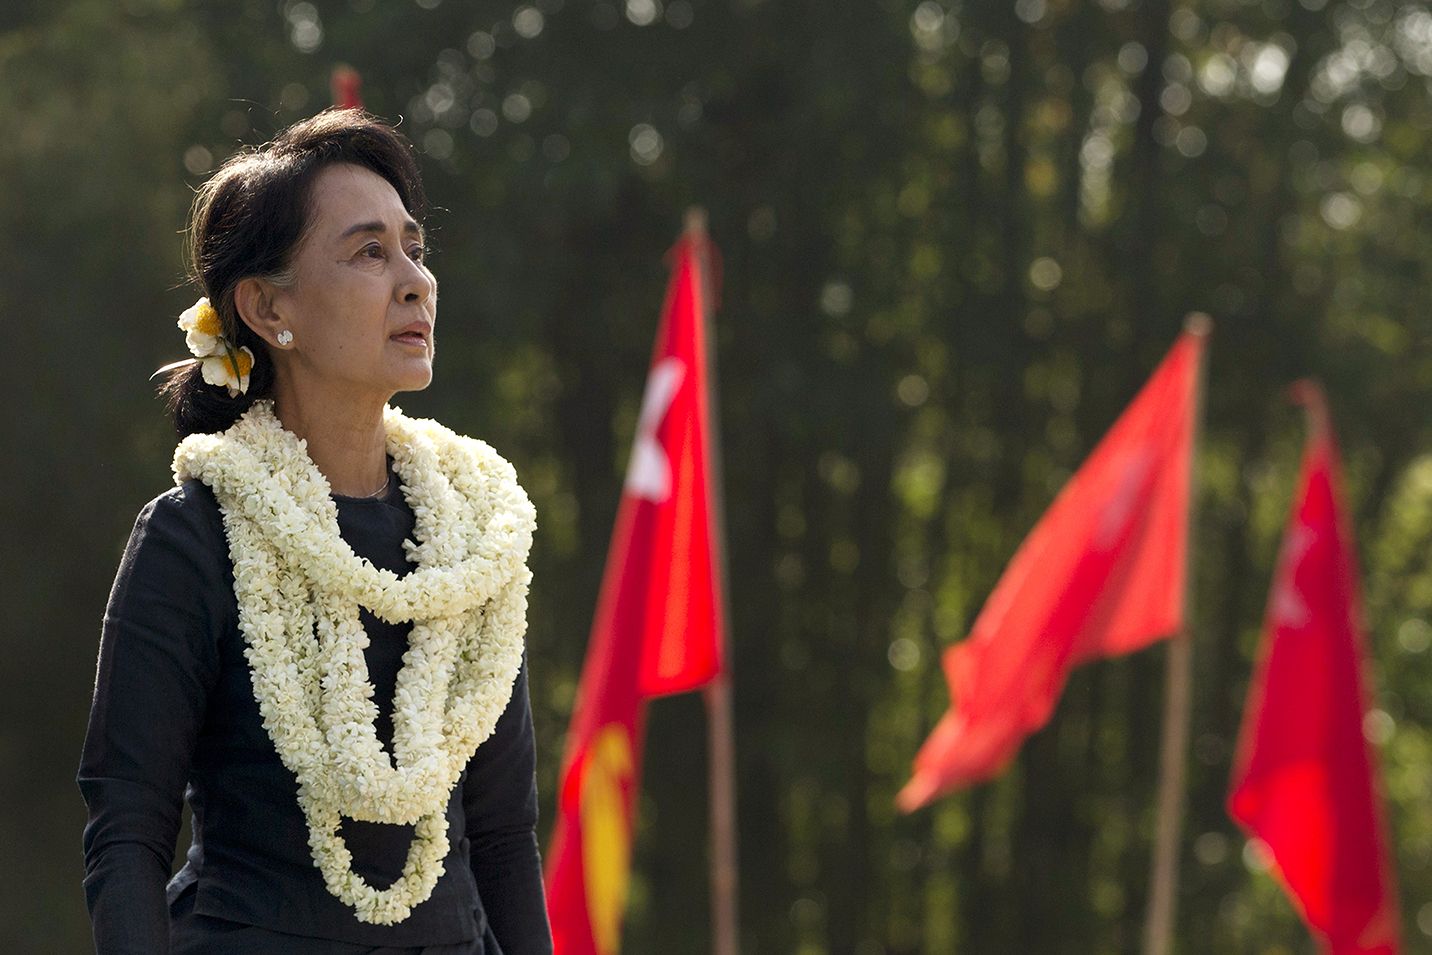 Who is Aung San Suu Kyi and why is she in China?